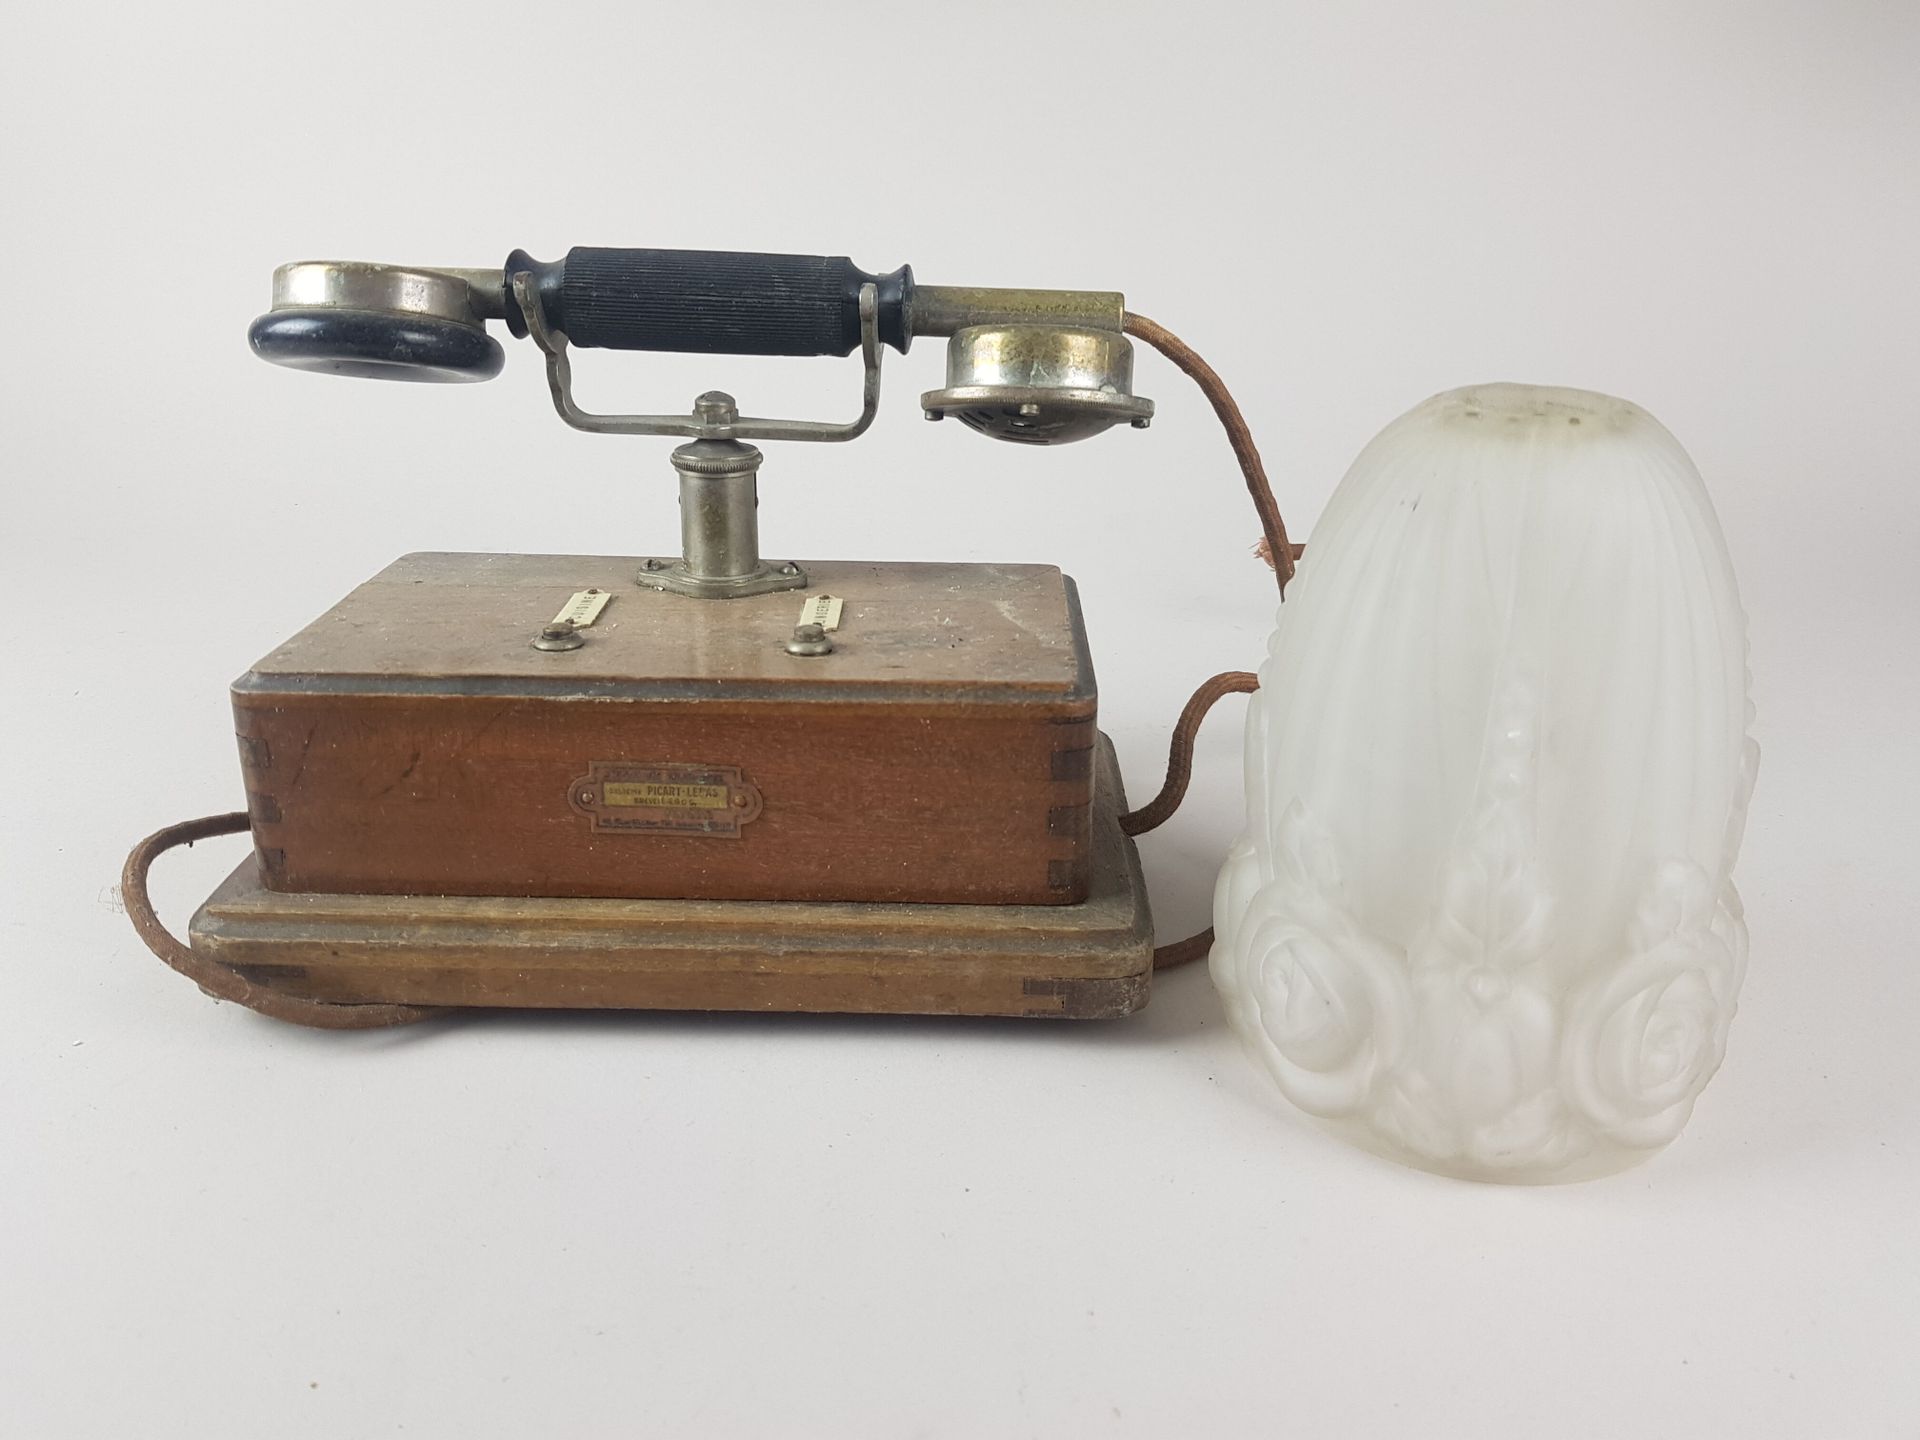 Null TELEPHONE and a glass TULIP for a light fixture - worn from use